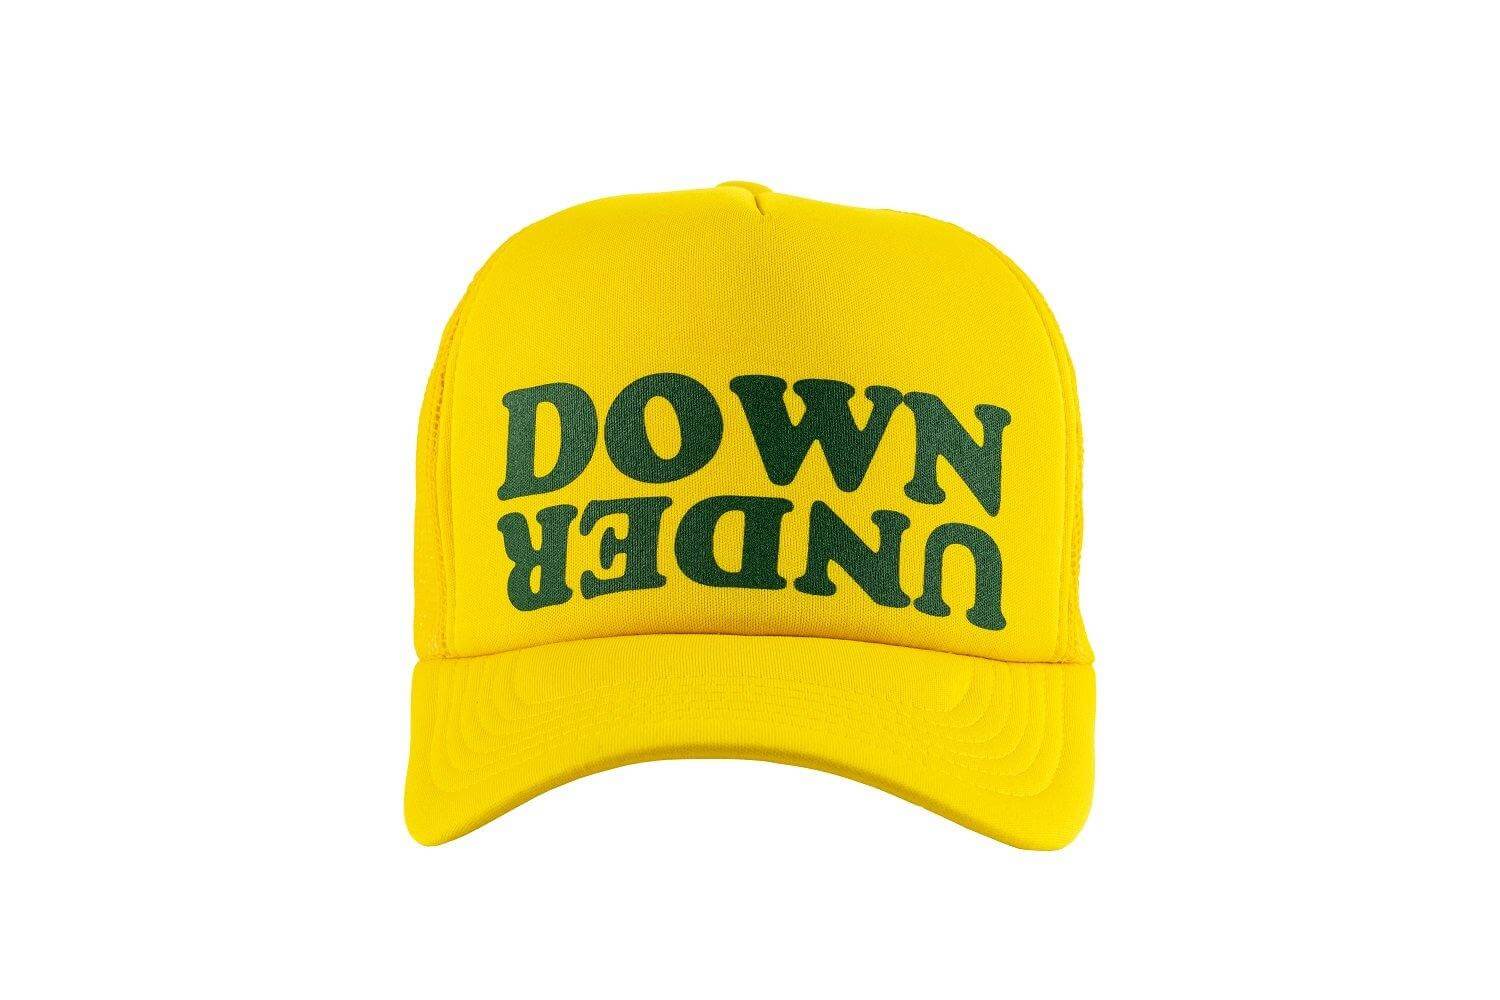 Down Under high crown trucker cap with mesh back and snapback  - Tropic Trucker Australia®